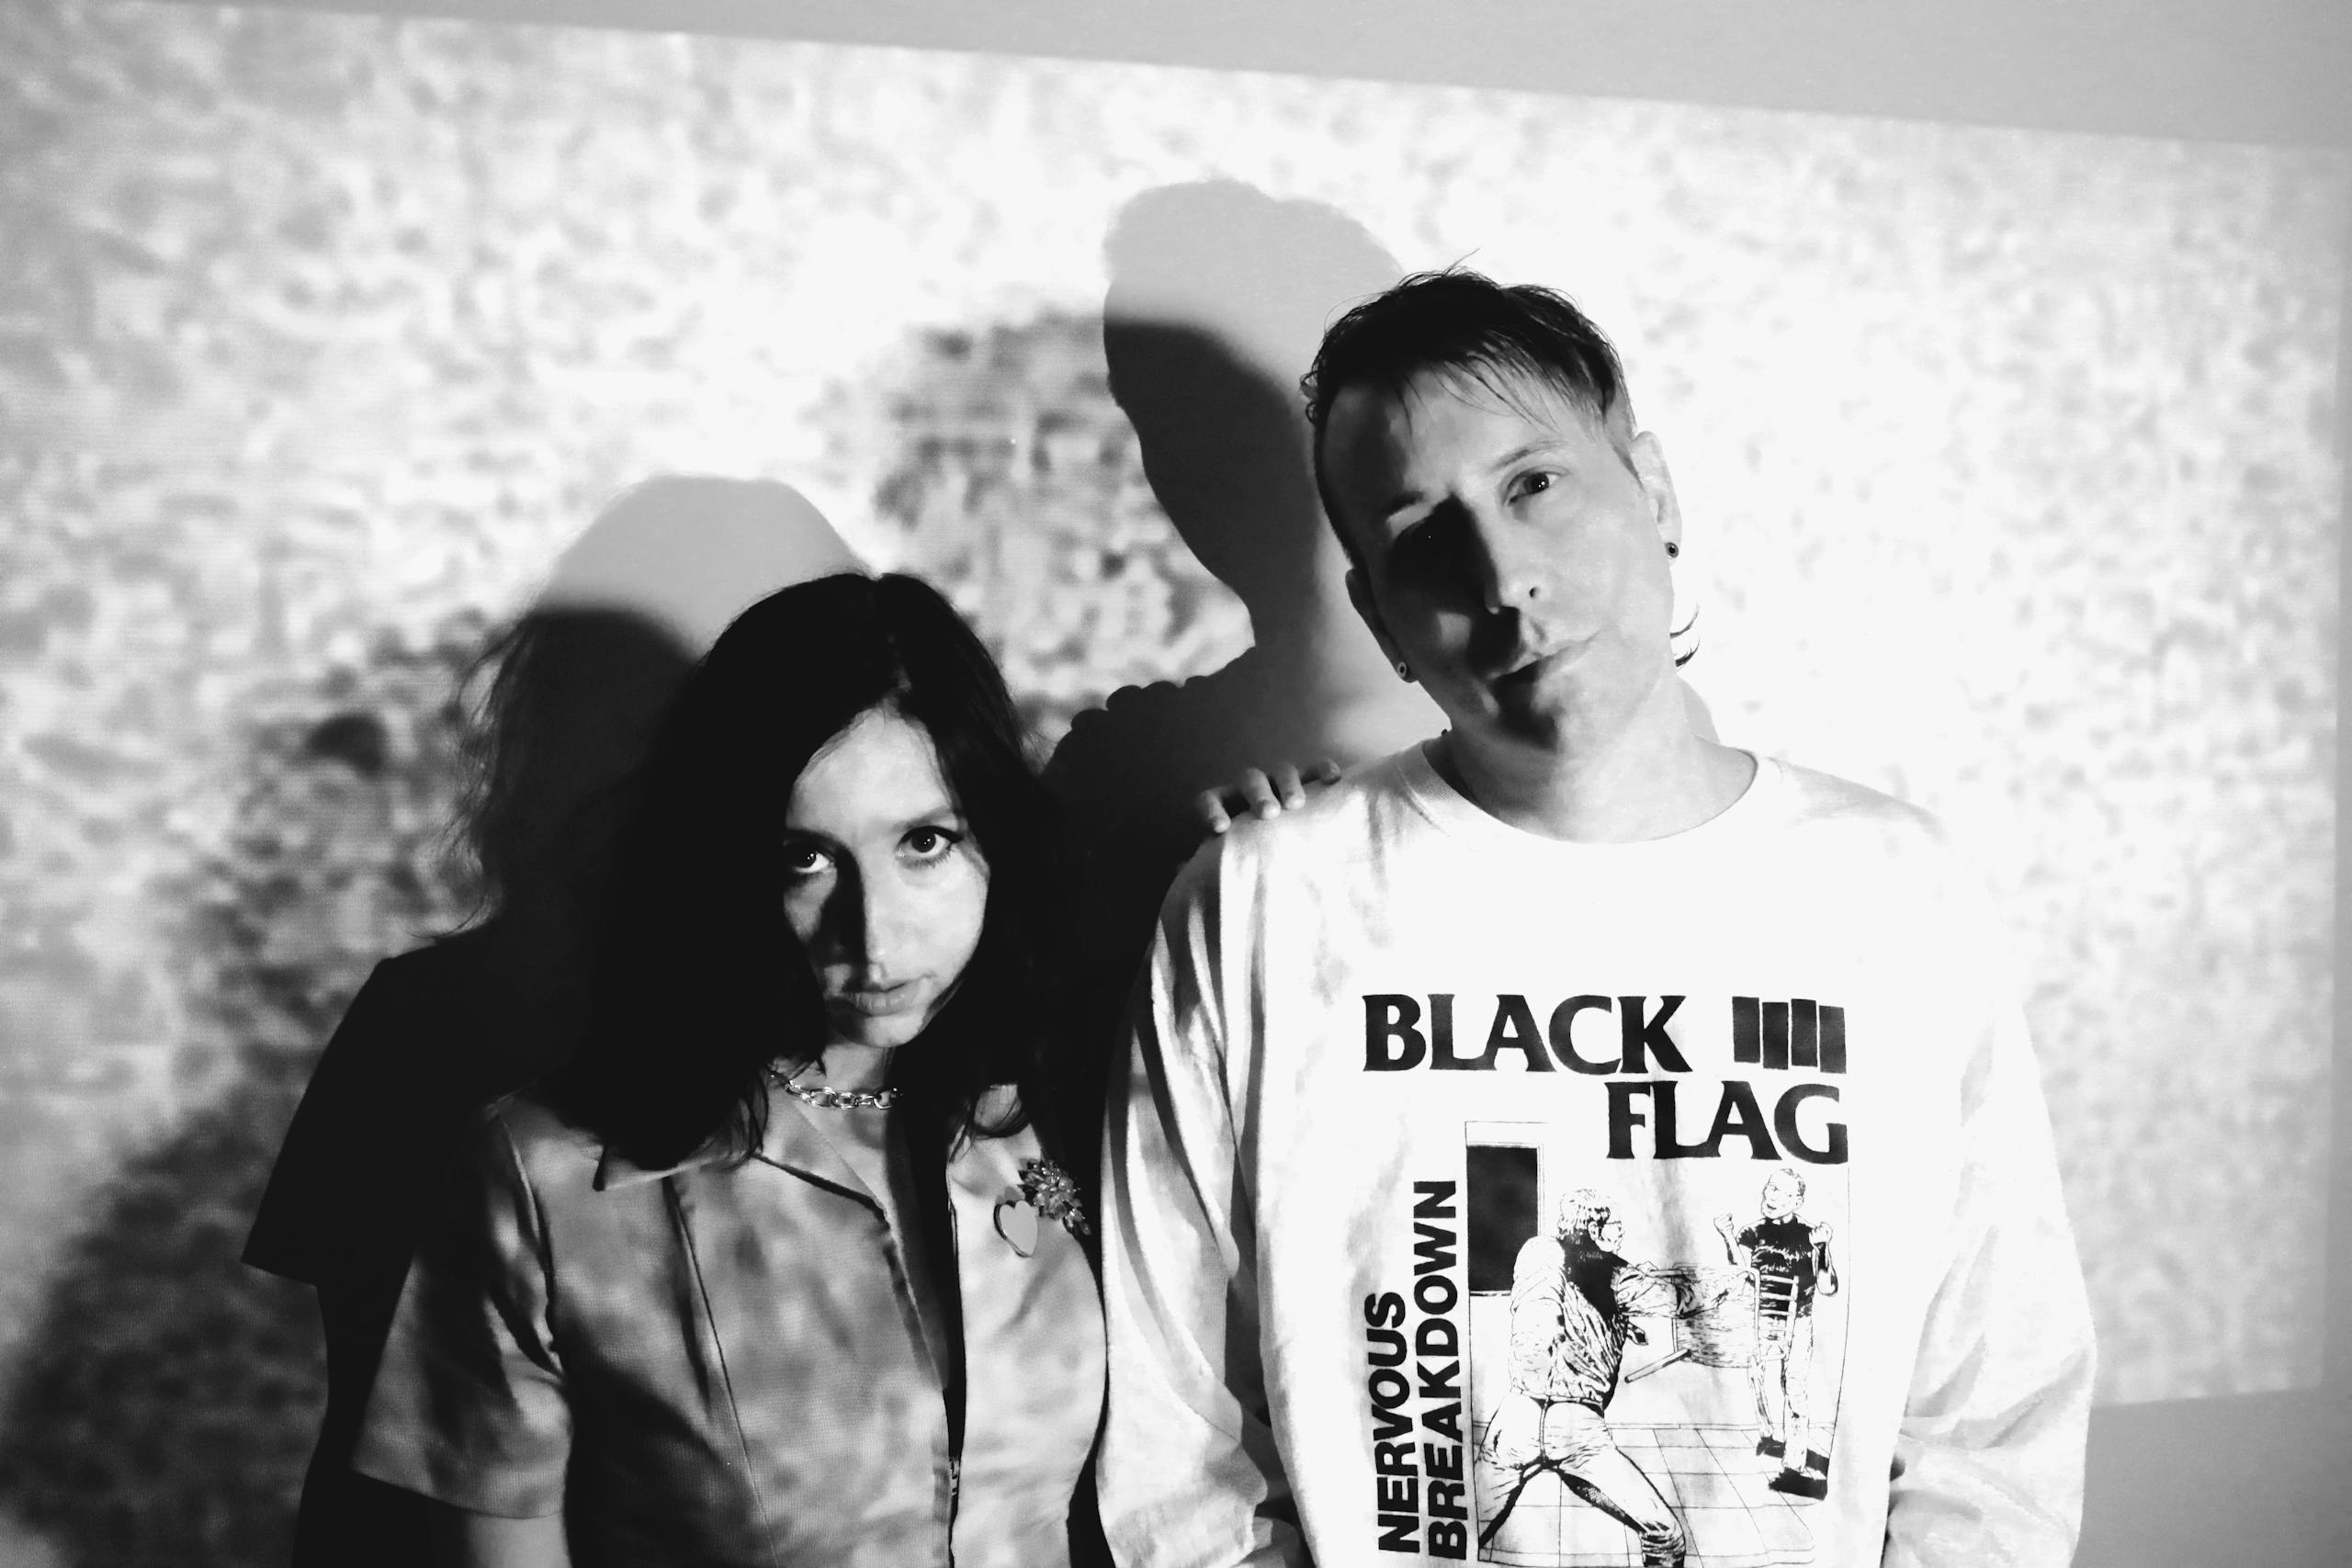 A black and white photo of a man and woman with a projection in the background